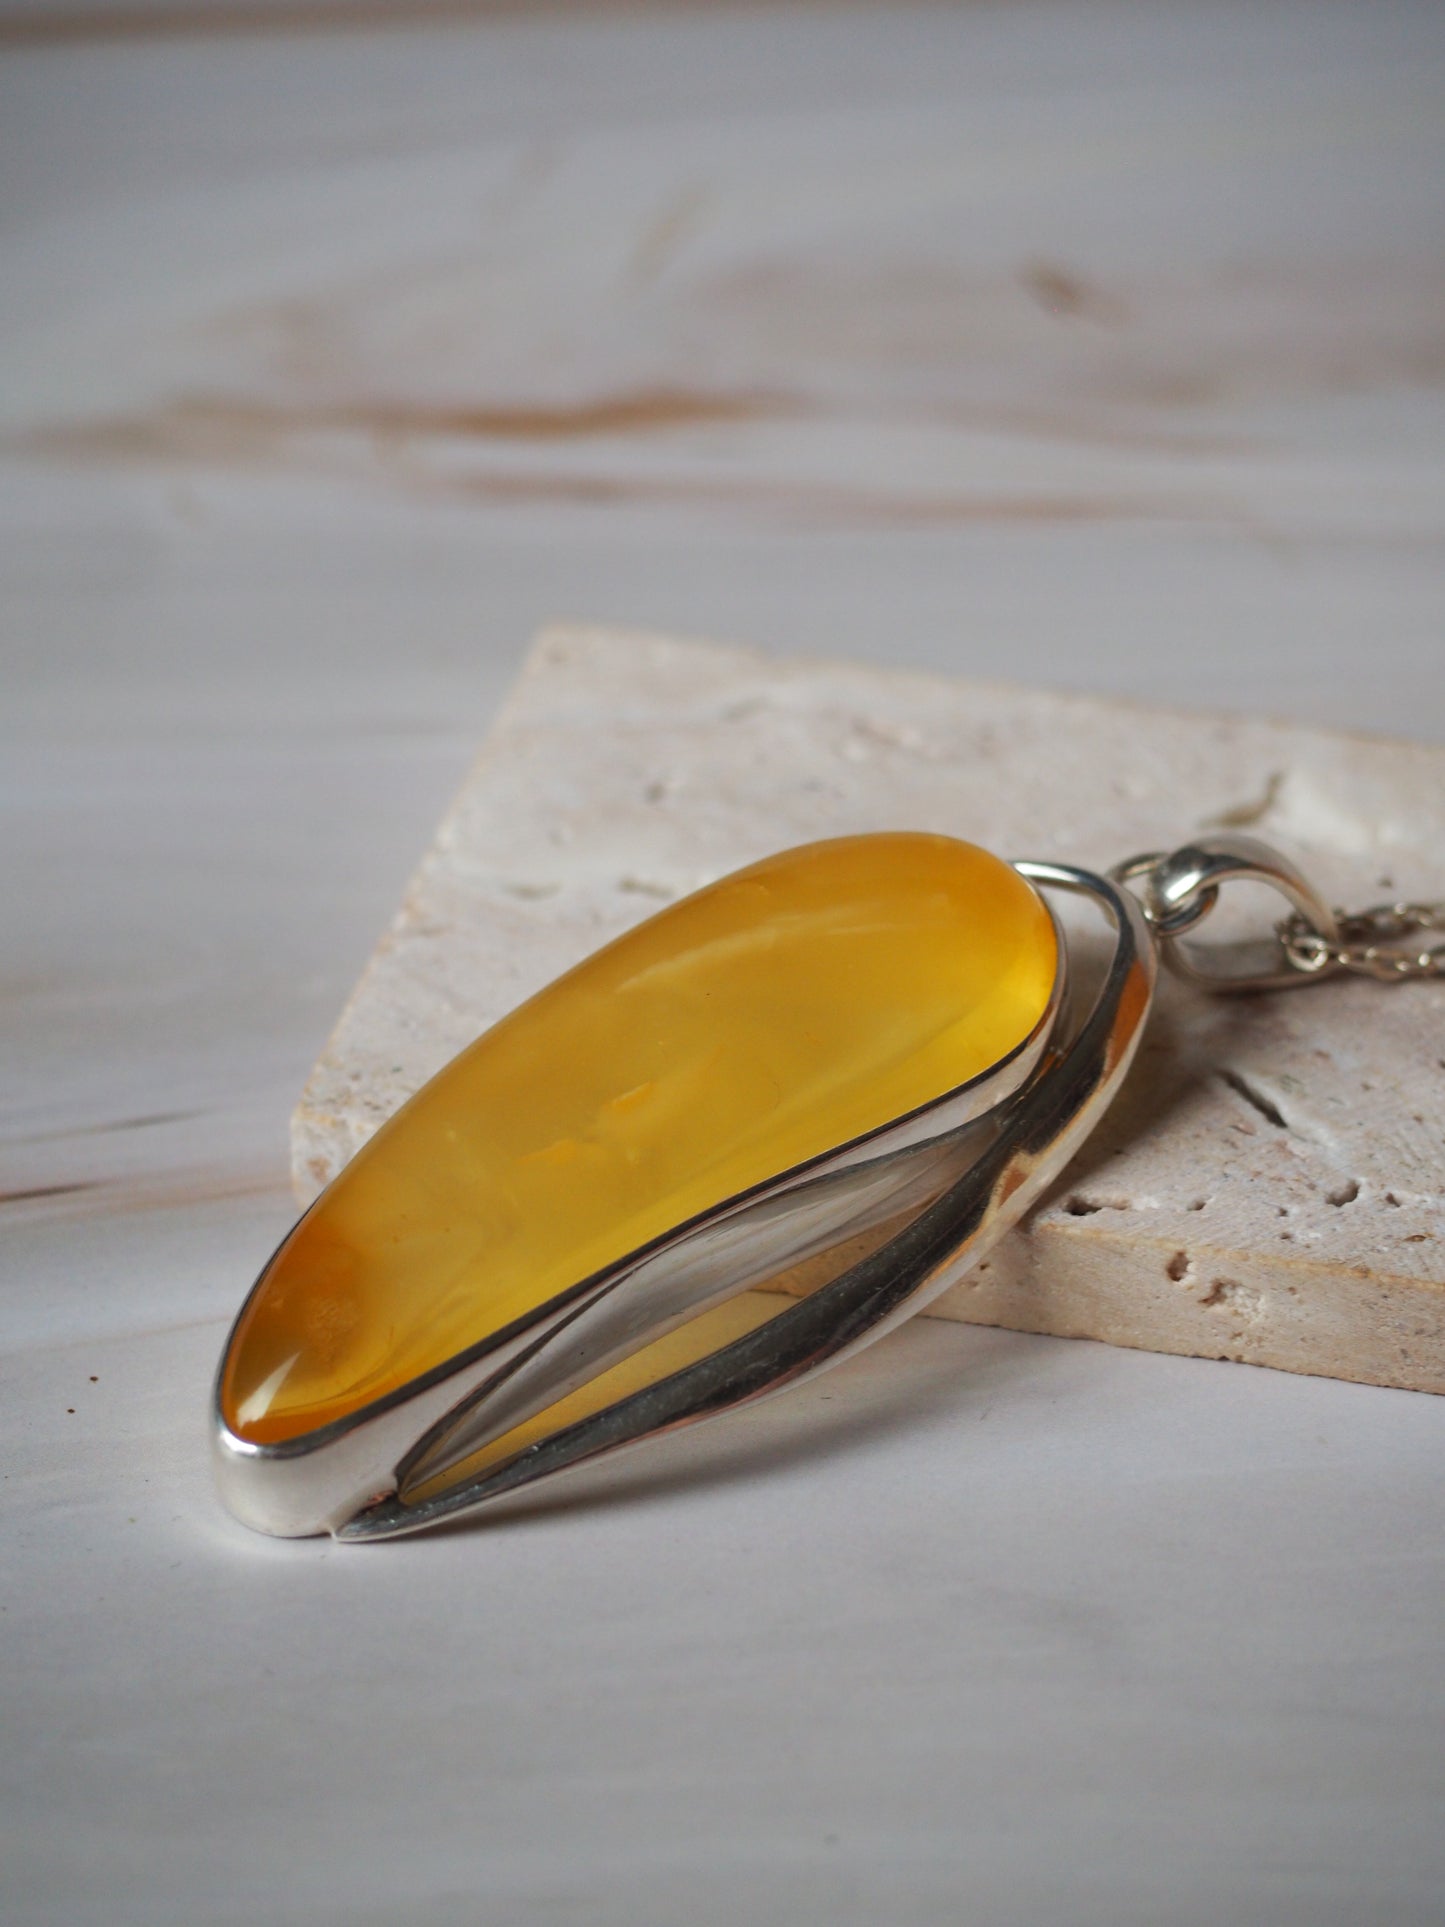 Long Butterscotch Amber Pendant in Silver